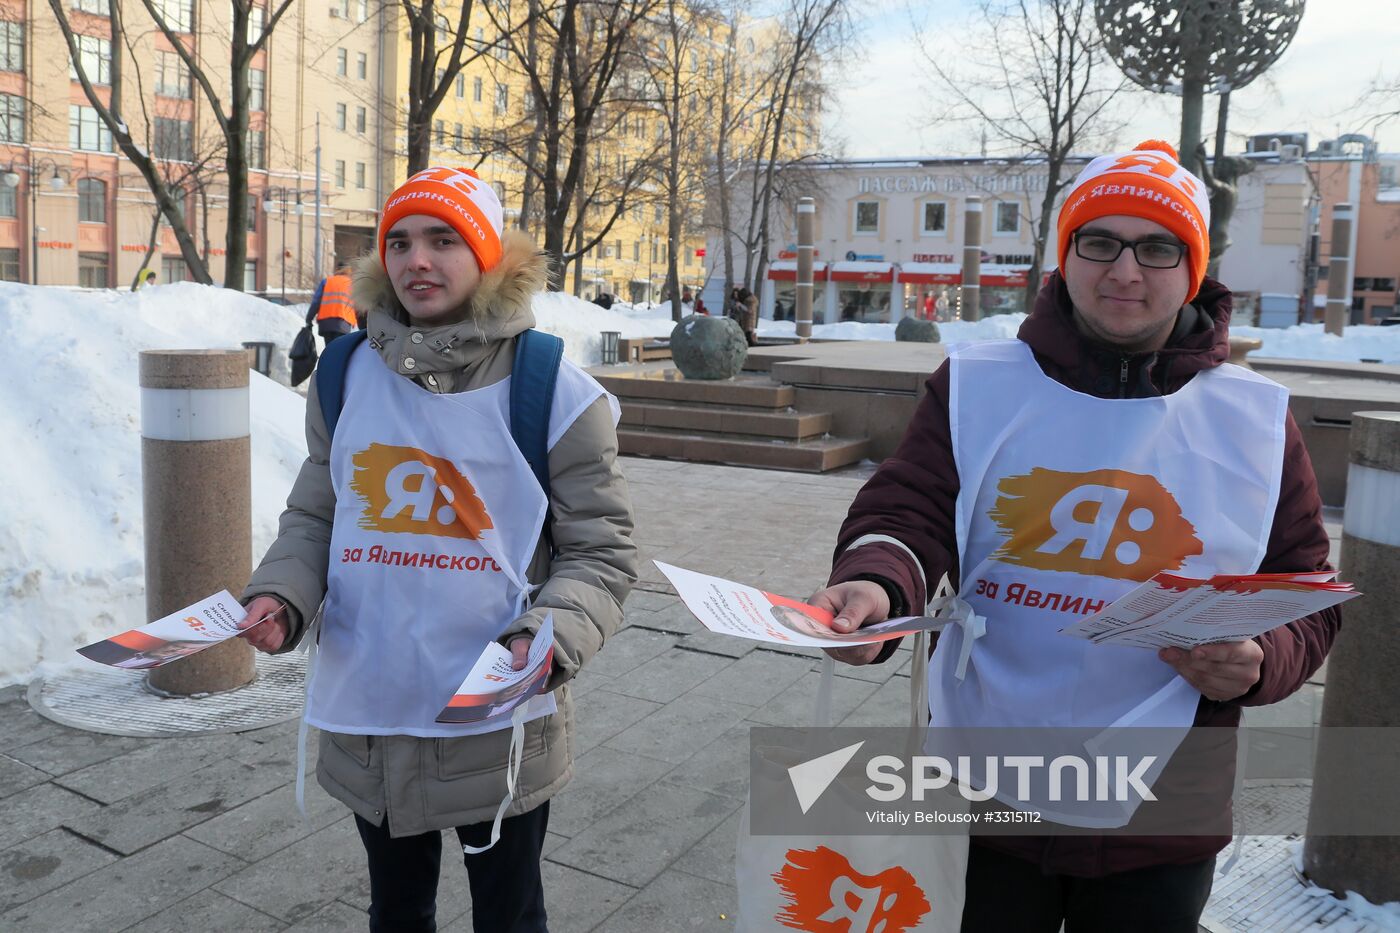 Distributing election leaflets in support of presidential candidate Grigory Yavlinsky